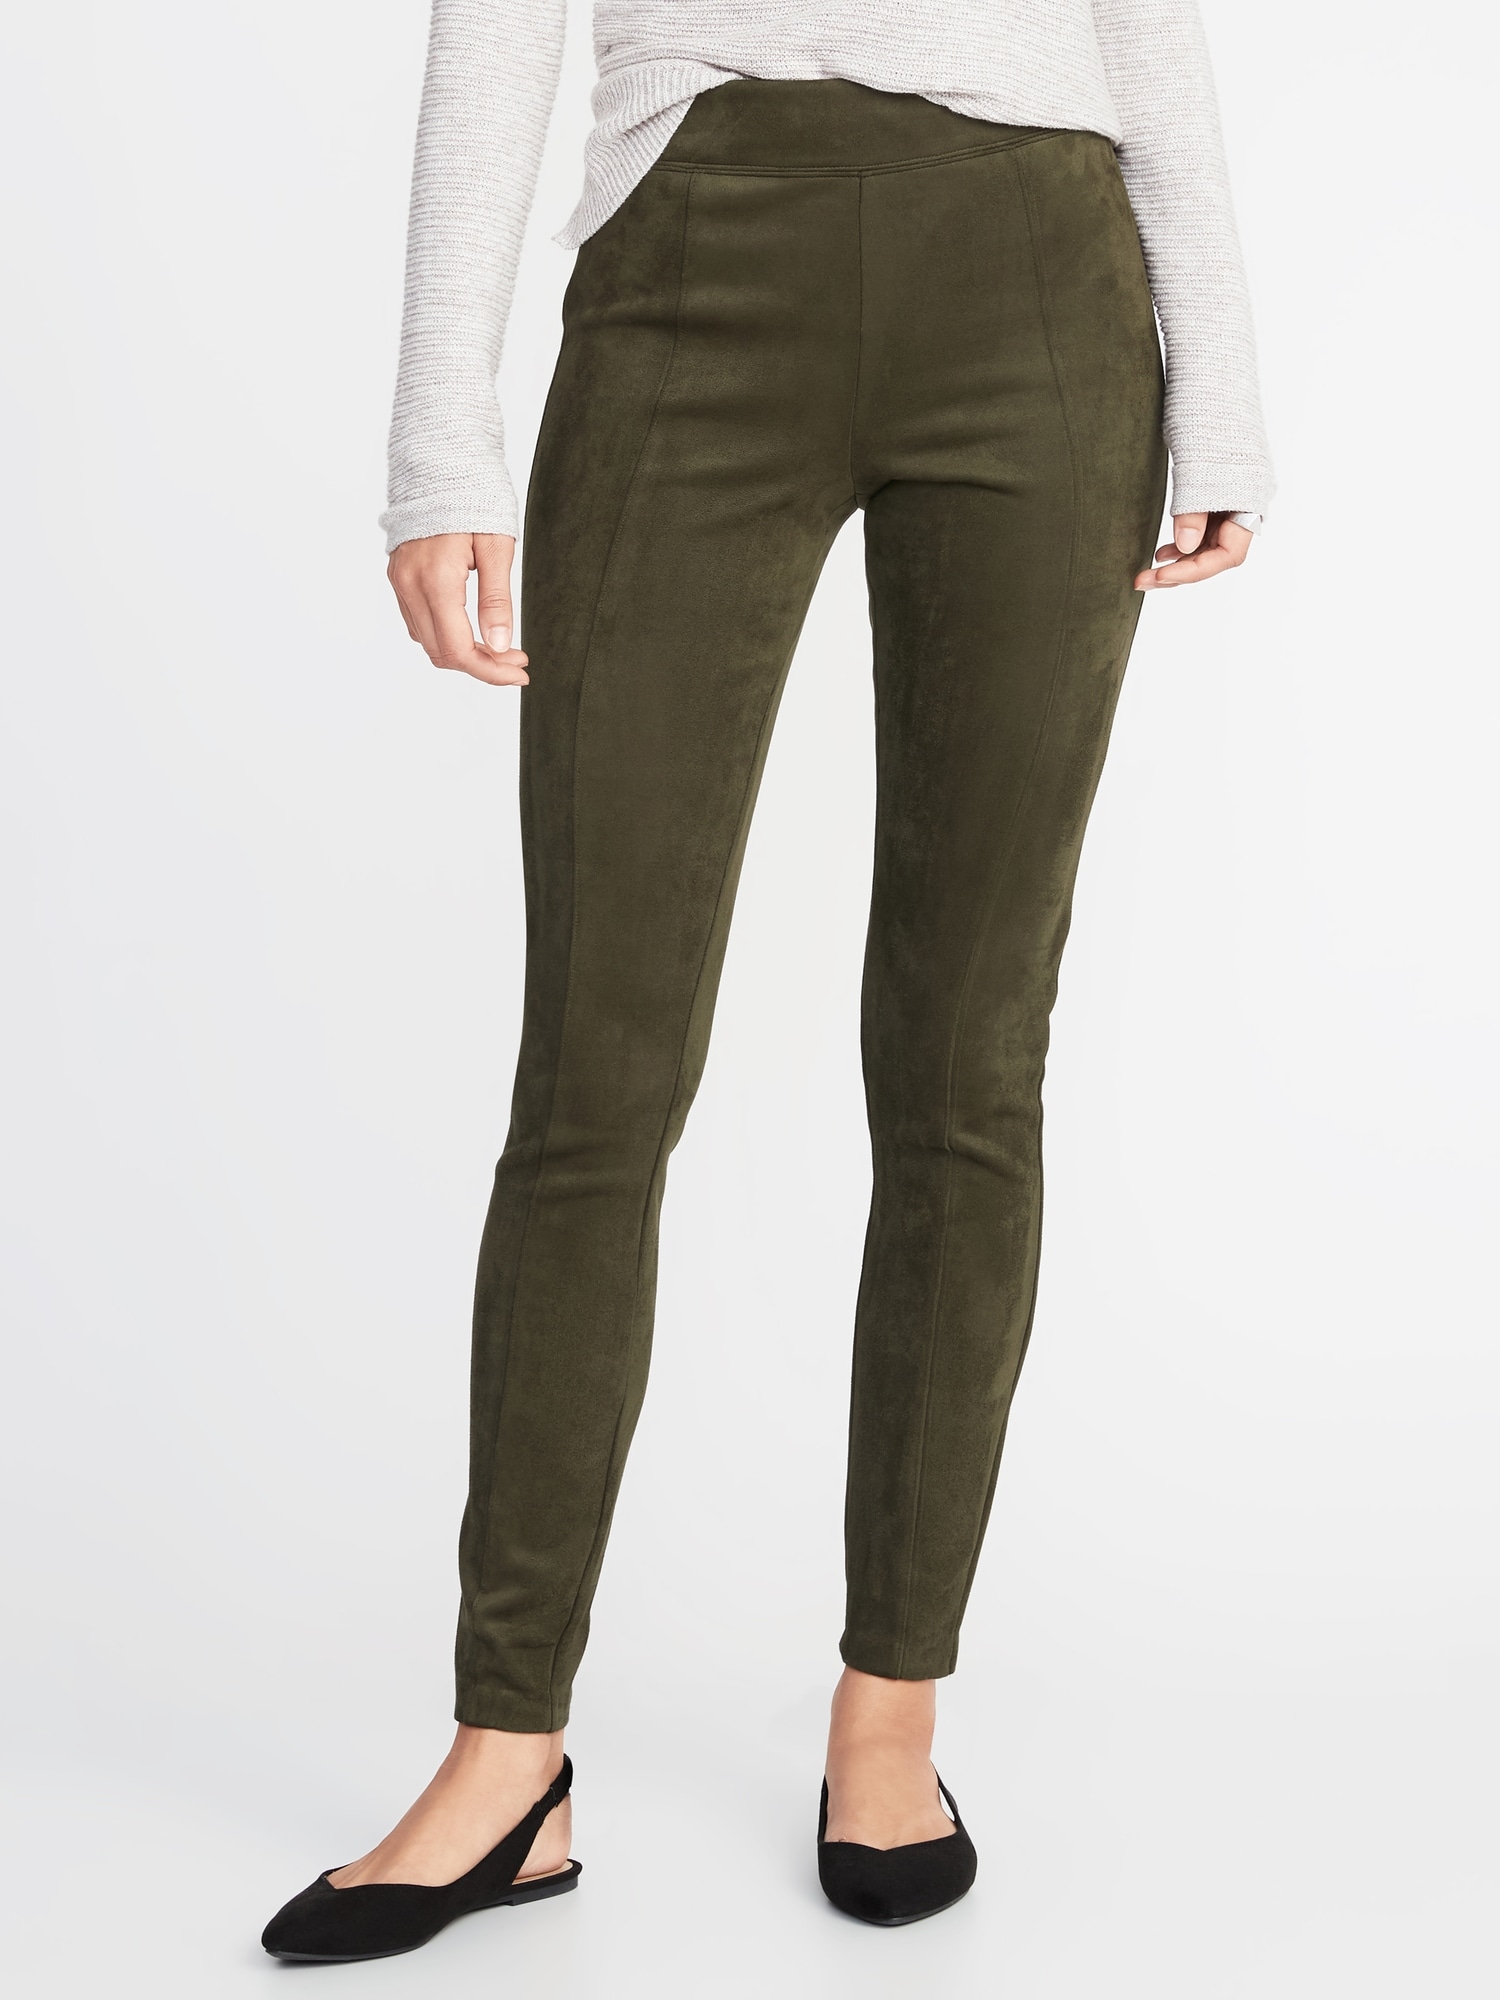 High-Waisted Stevie Faux-Suede Ponte-Knit Pants For Women